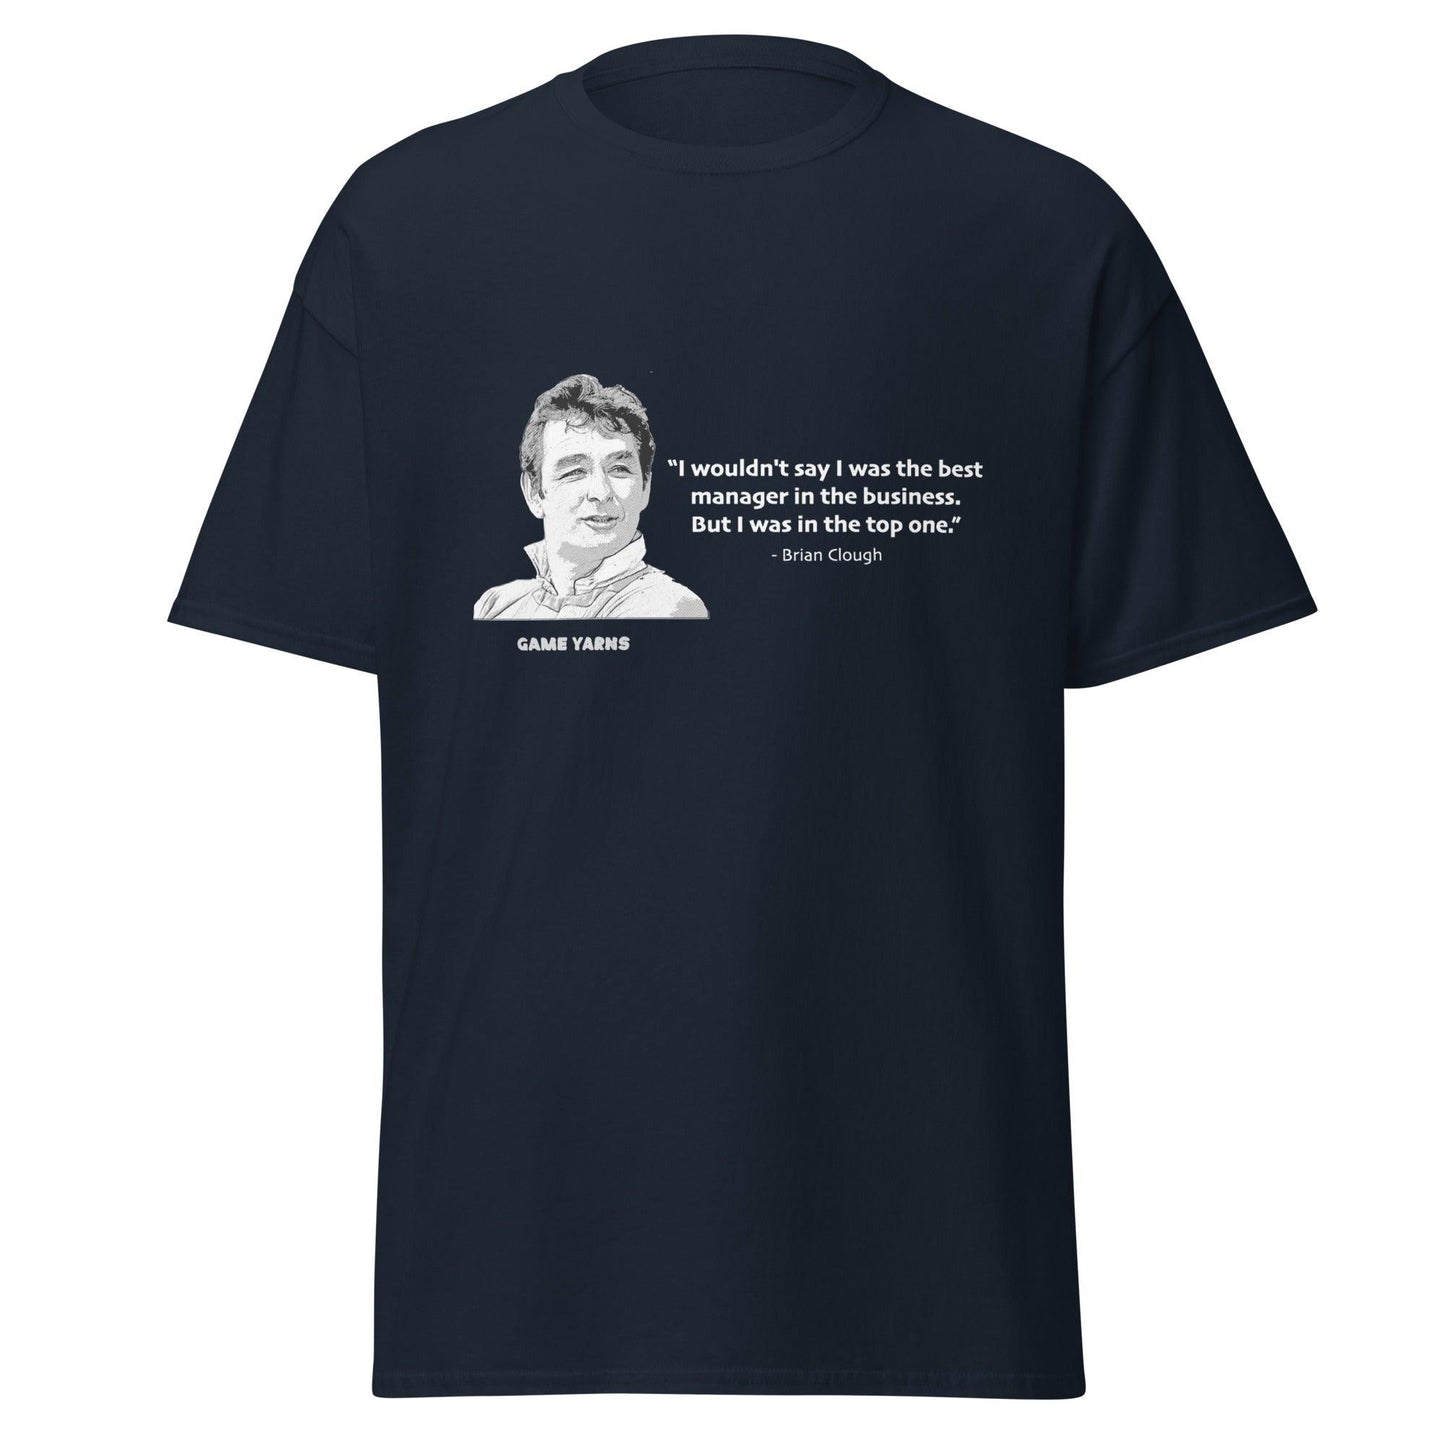 Brian Clough Top Manager T-Shirt by Game Yarns